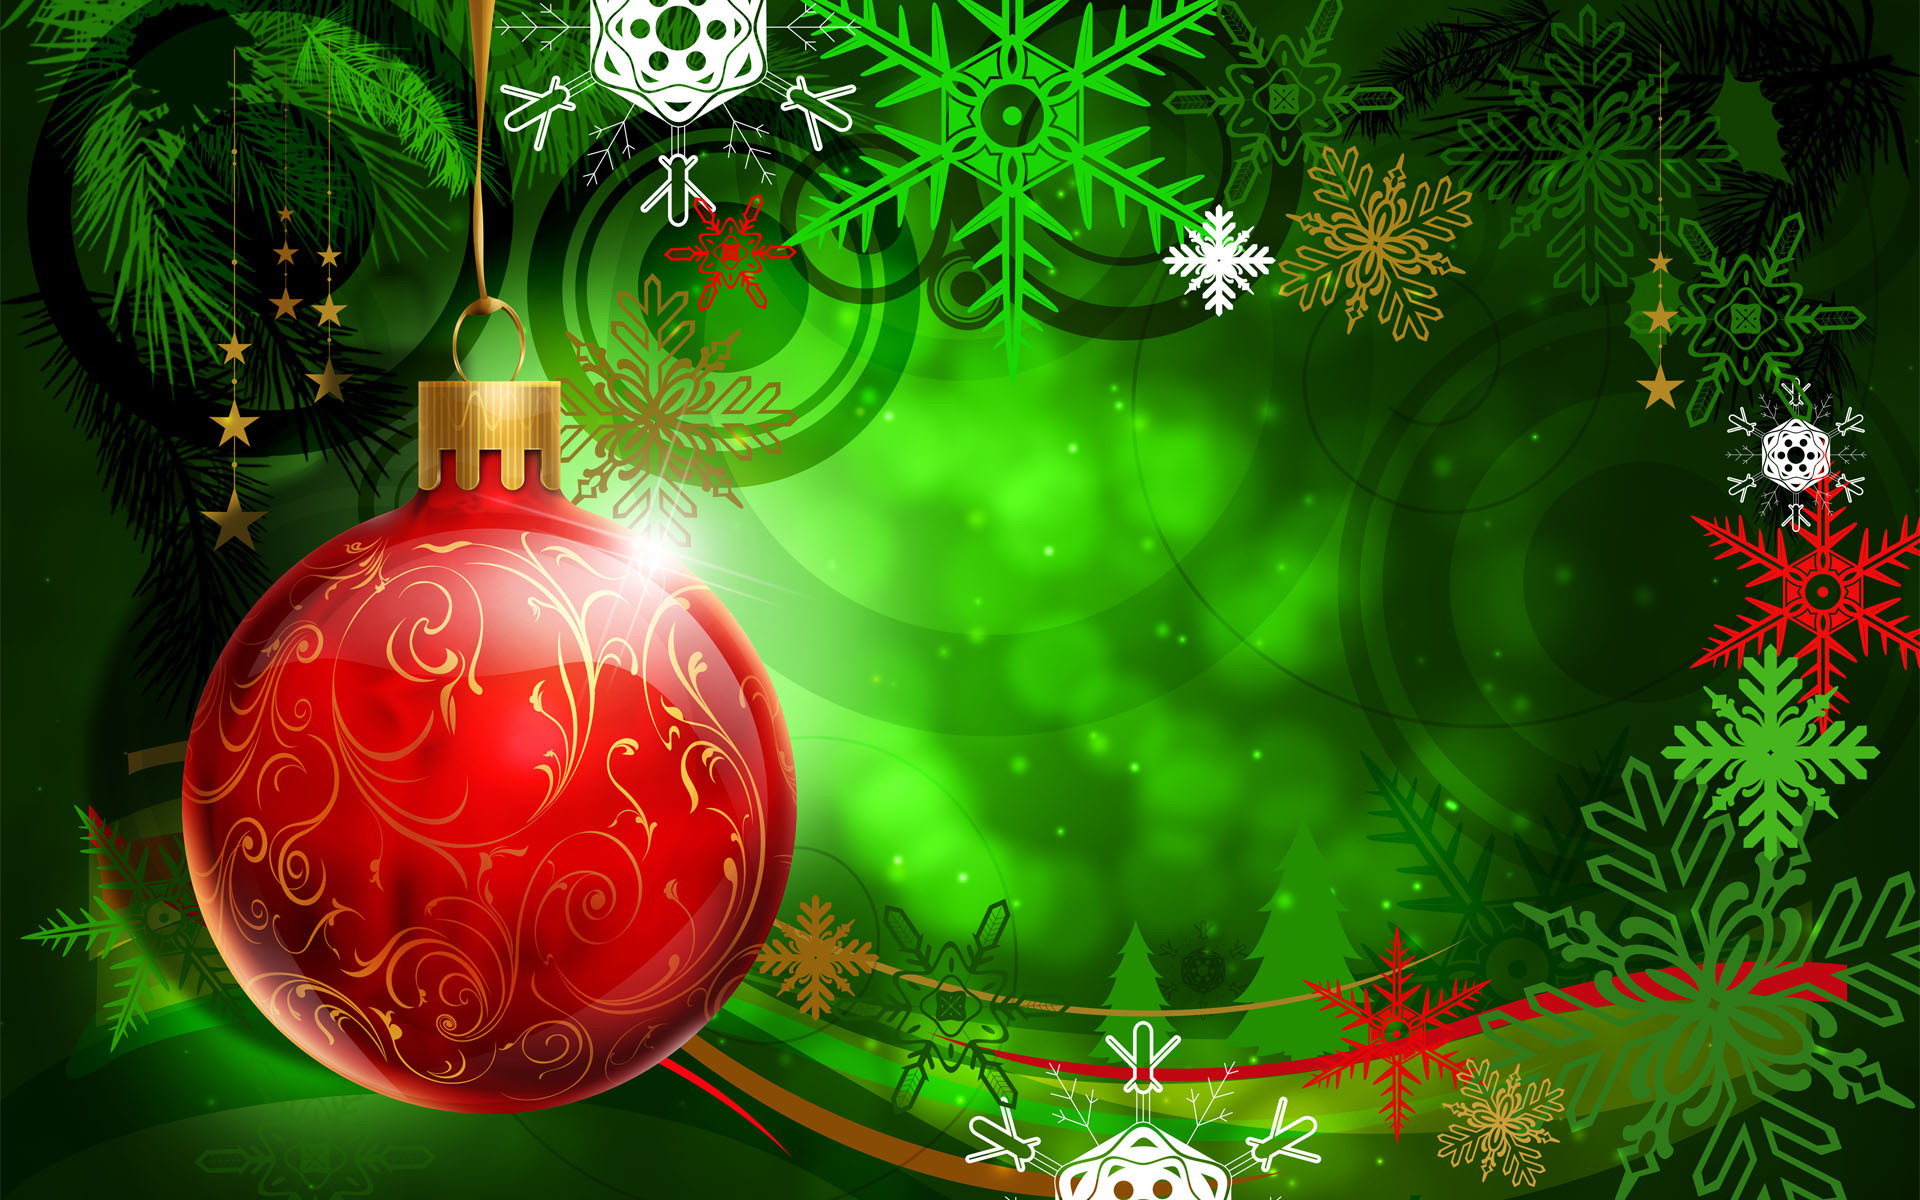 1920x1200 Red Christmas Ball on Green Background Wallpapers - HD Wallpapers 16426